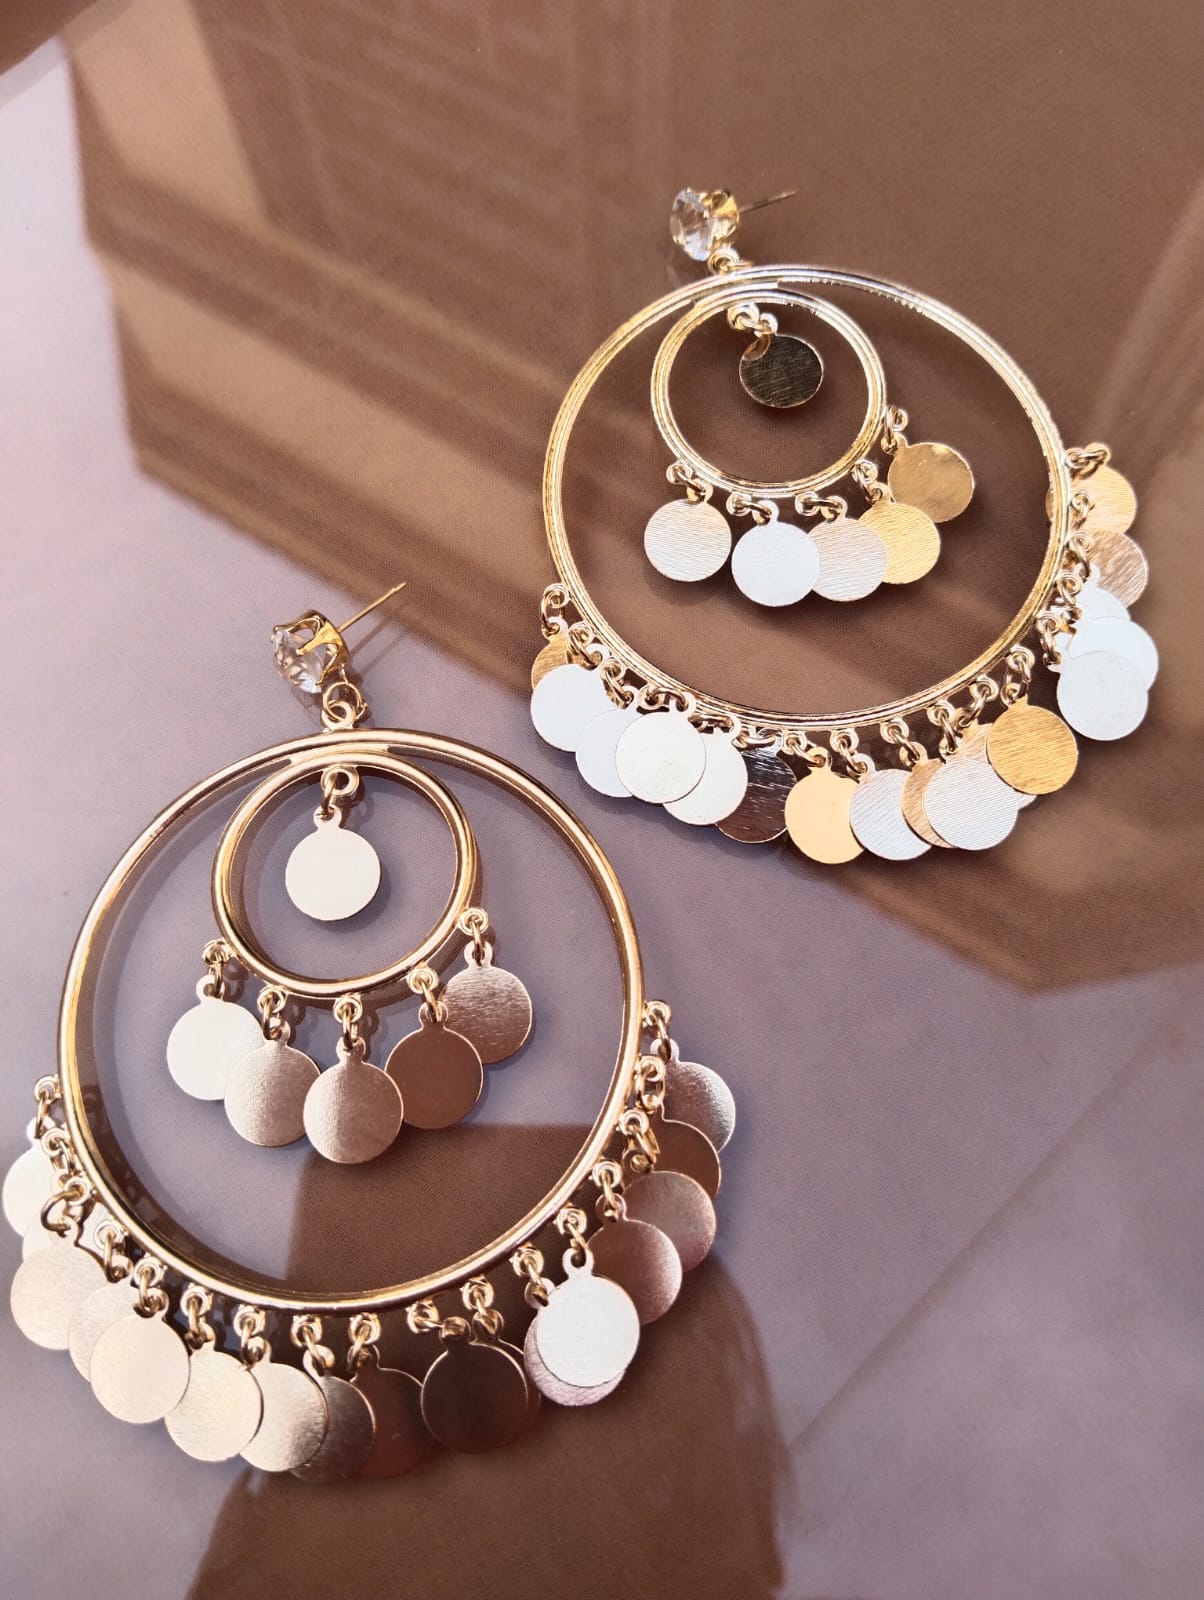 "Trinketts Dazzling Hoop Ensemble Earrings - silver glossy Hoops with Coin-Like Hangings, Lightweight and Statement-Making, Approx. 3 Inches in Size, Affordable Luxury at Rs. 380."